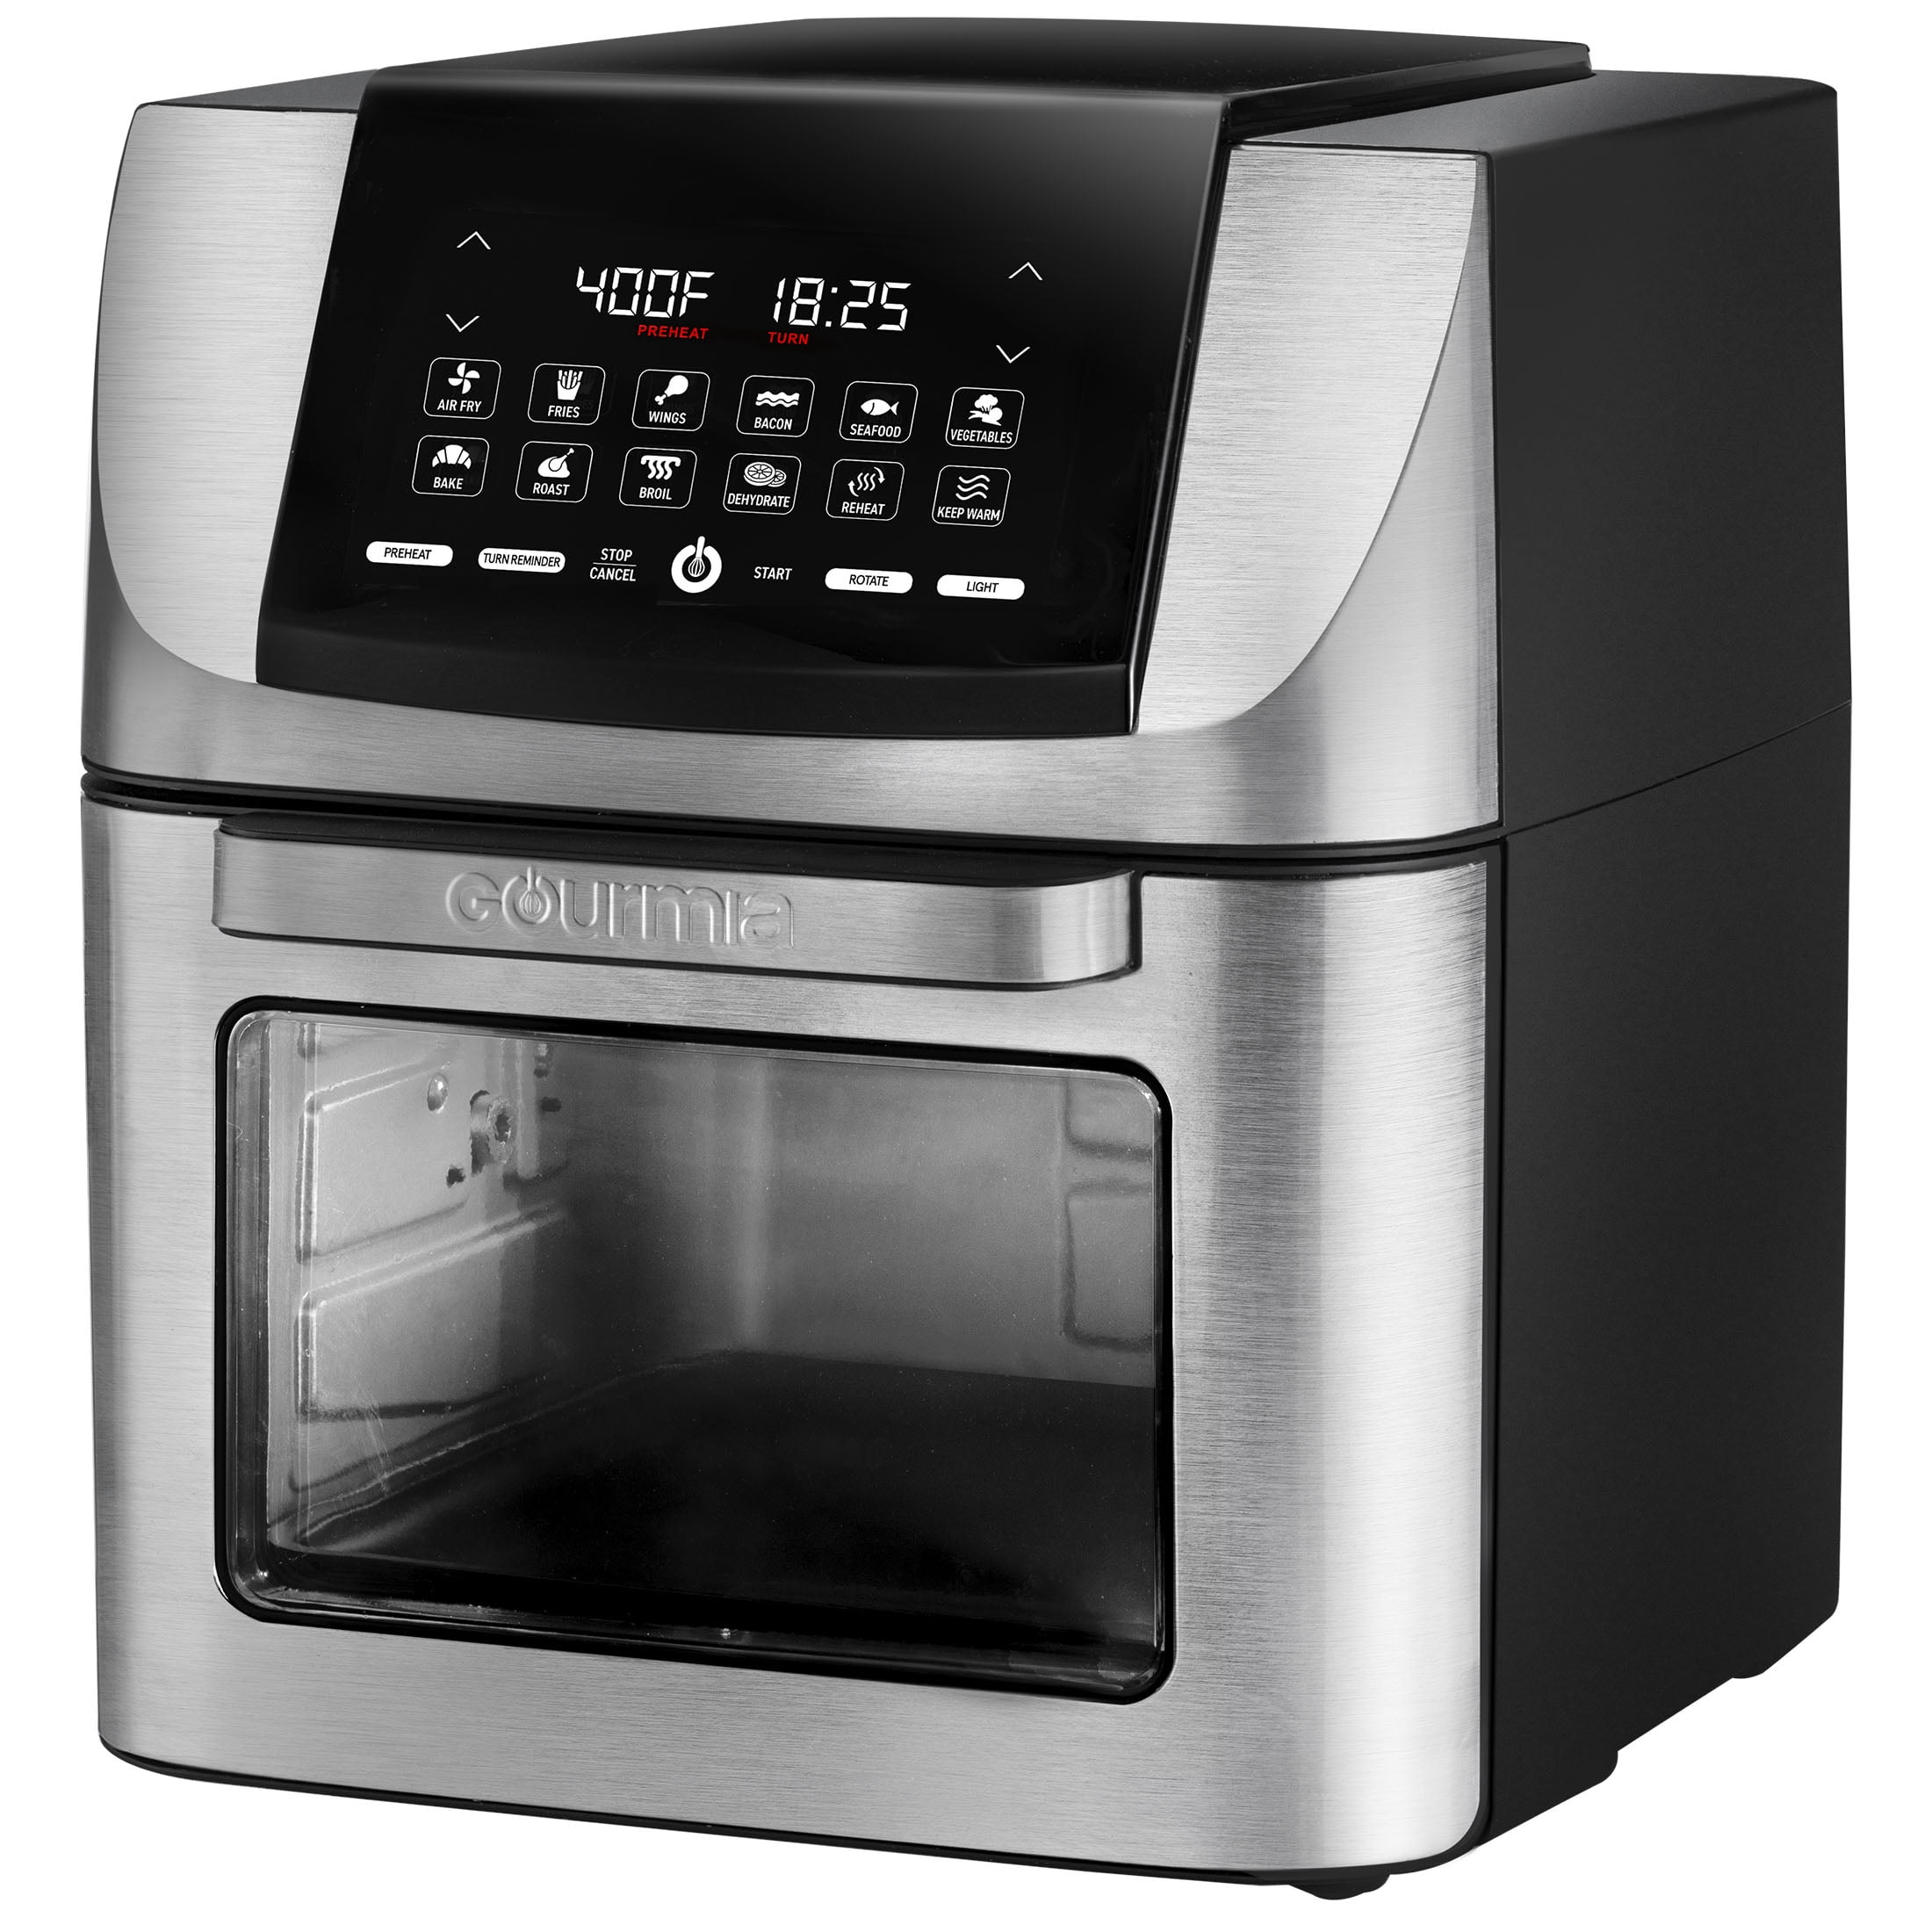 🔥 Gourmia 43L XL 12-Slice Digital Air Fryer Oven with French Door 🔥 -  household items - by owner - housewares sale 